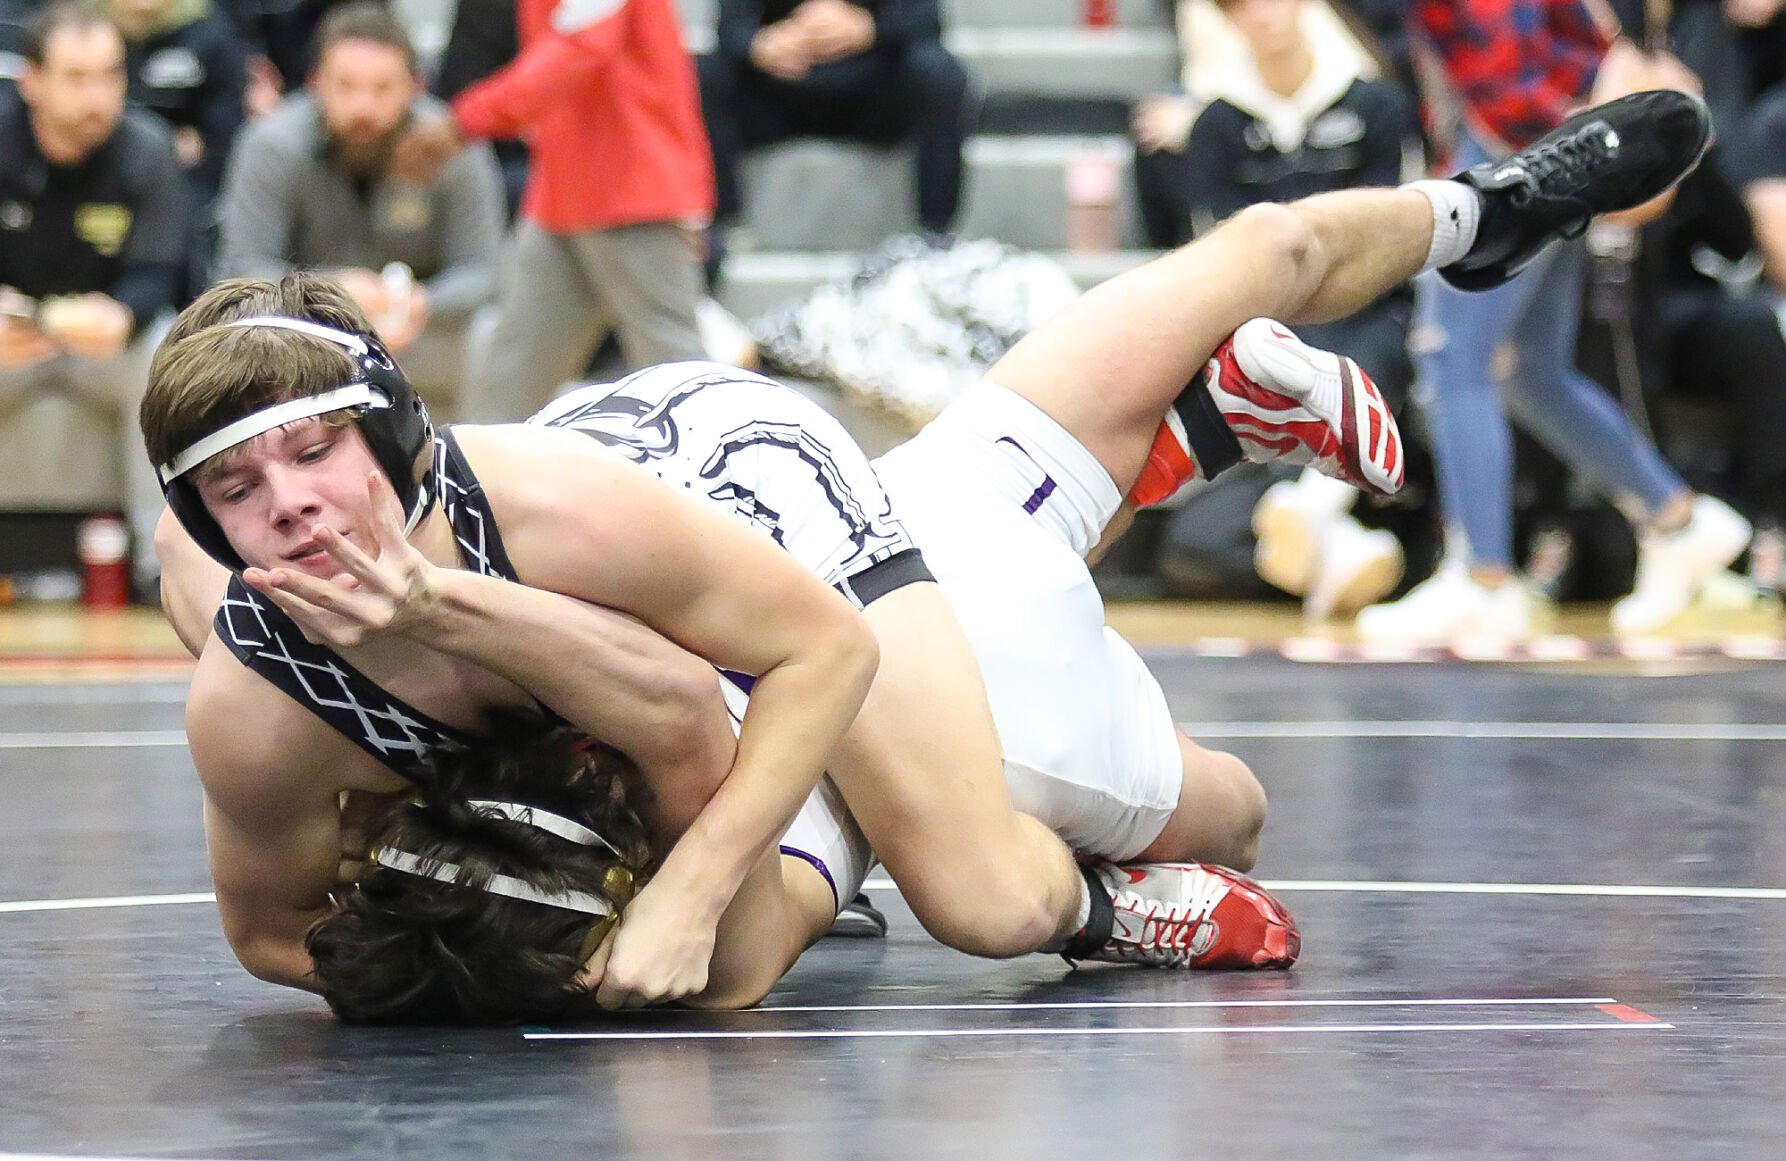 Boys wrestling spotlight Triads Crouch wastes no time on or off the image